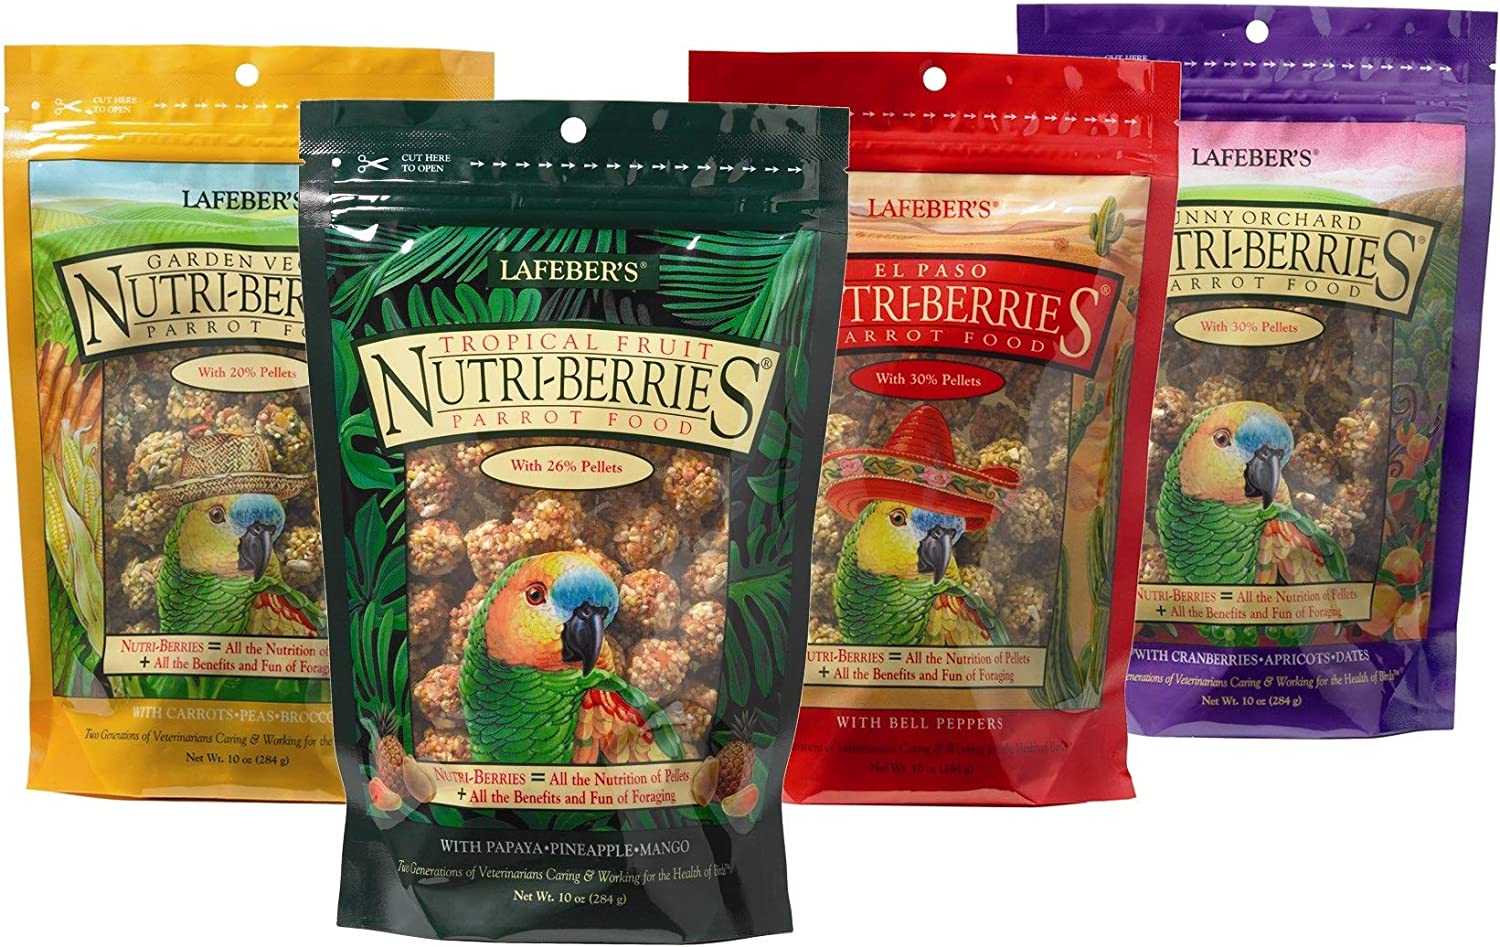 4 bags of Nutri-Berries in different flavors